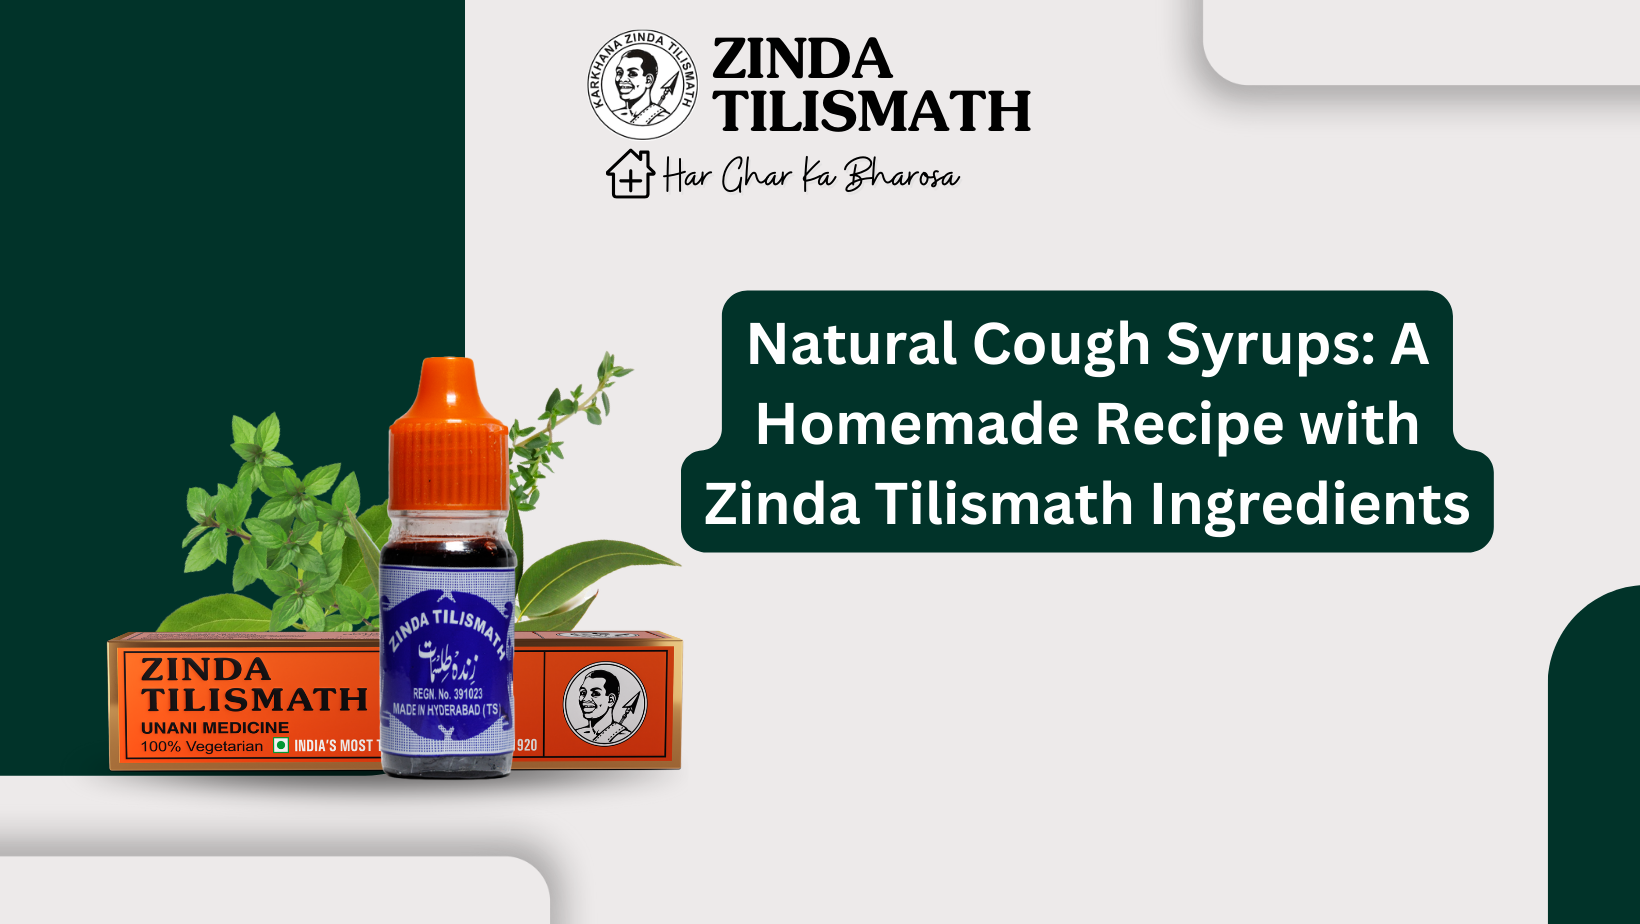 Natural Cough Syrups: A Homemade Recipe with Zinda Tilismath Ingredients